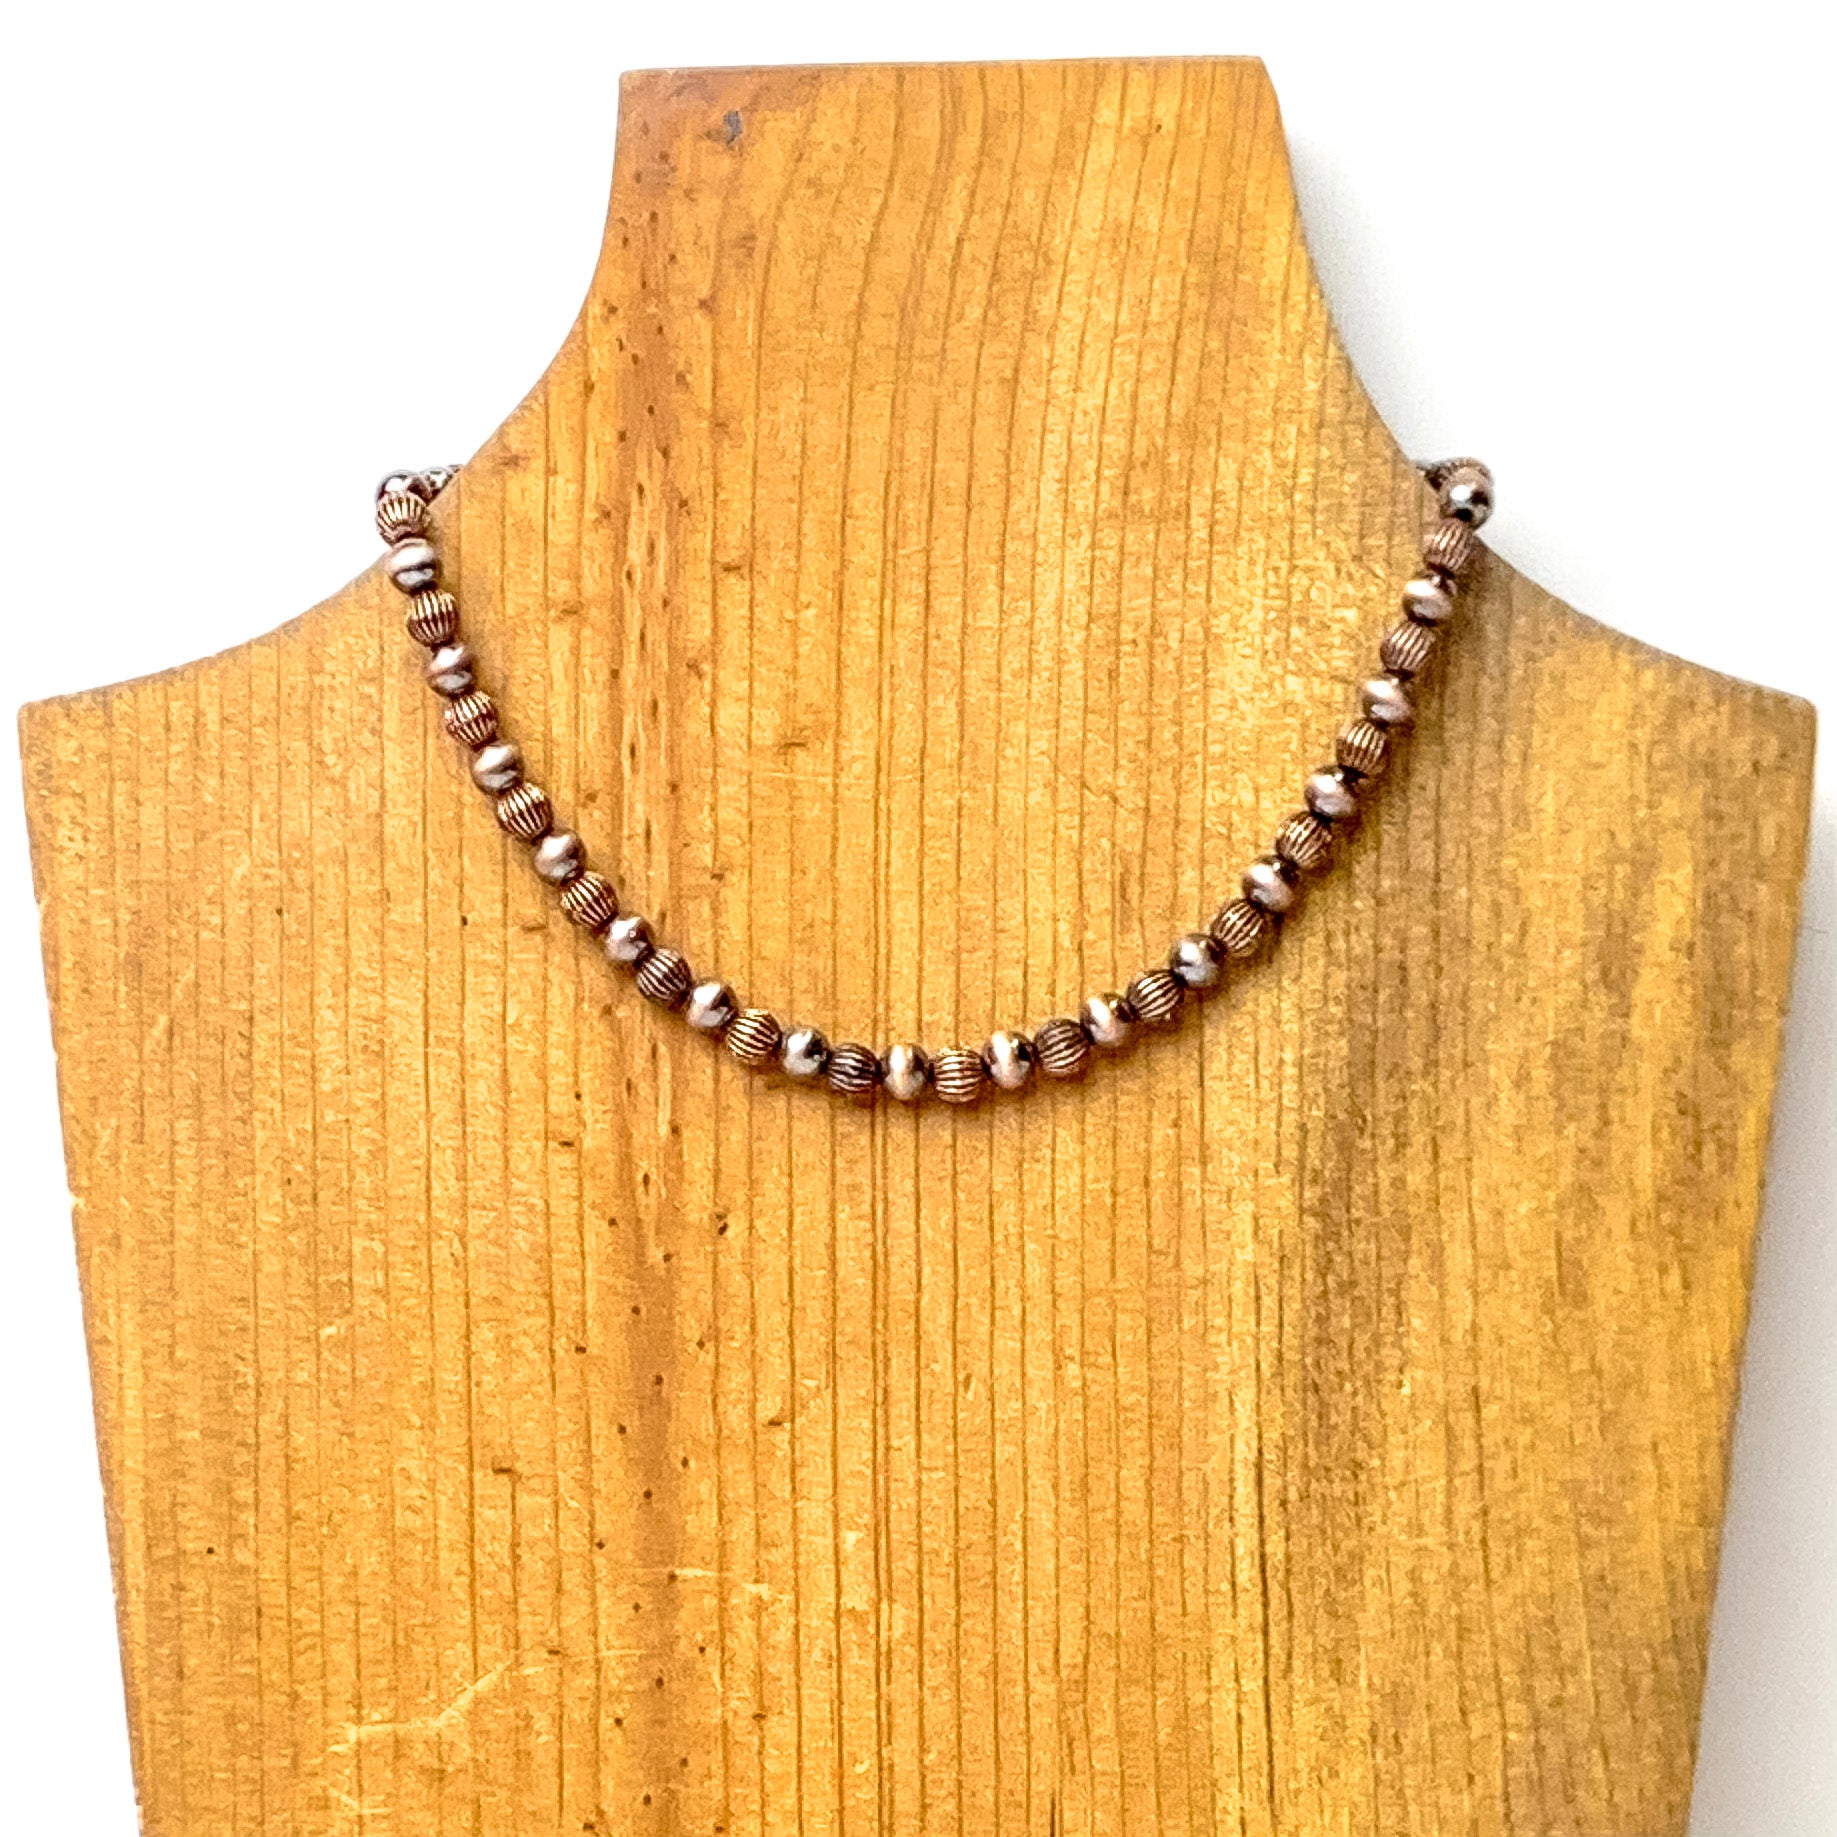 Faux Navajo Pearl Choker Necklace with Corrugated Spacers in Copper Tone - Giddy Up Glamour Boutique